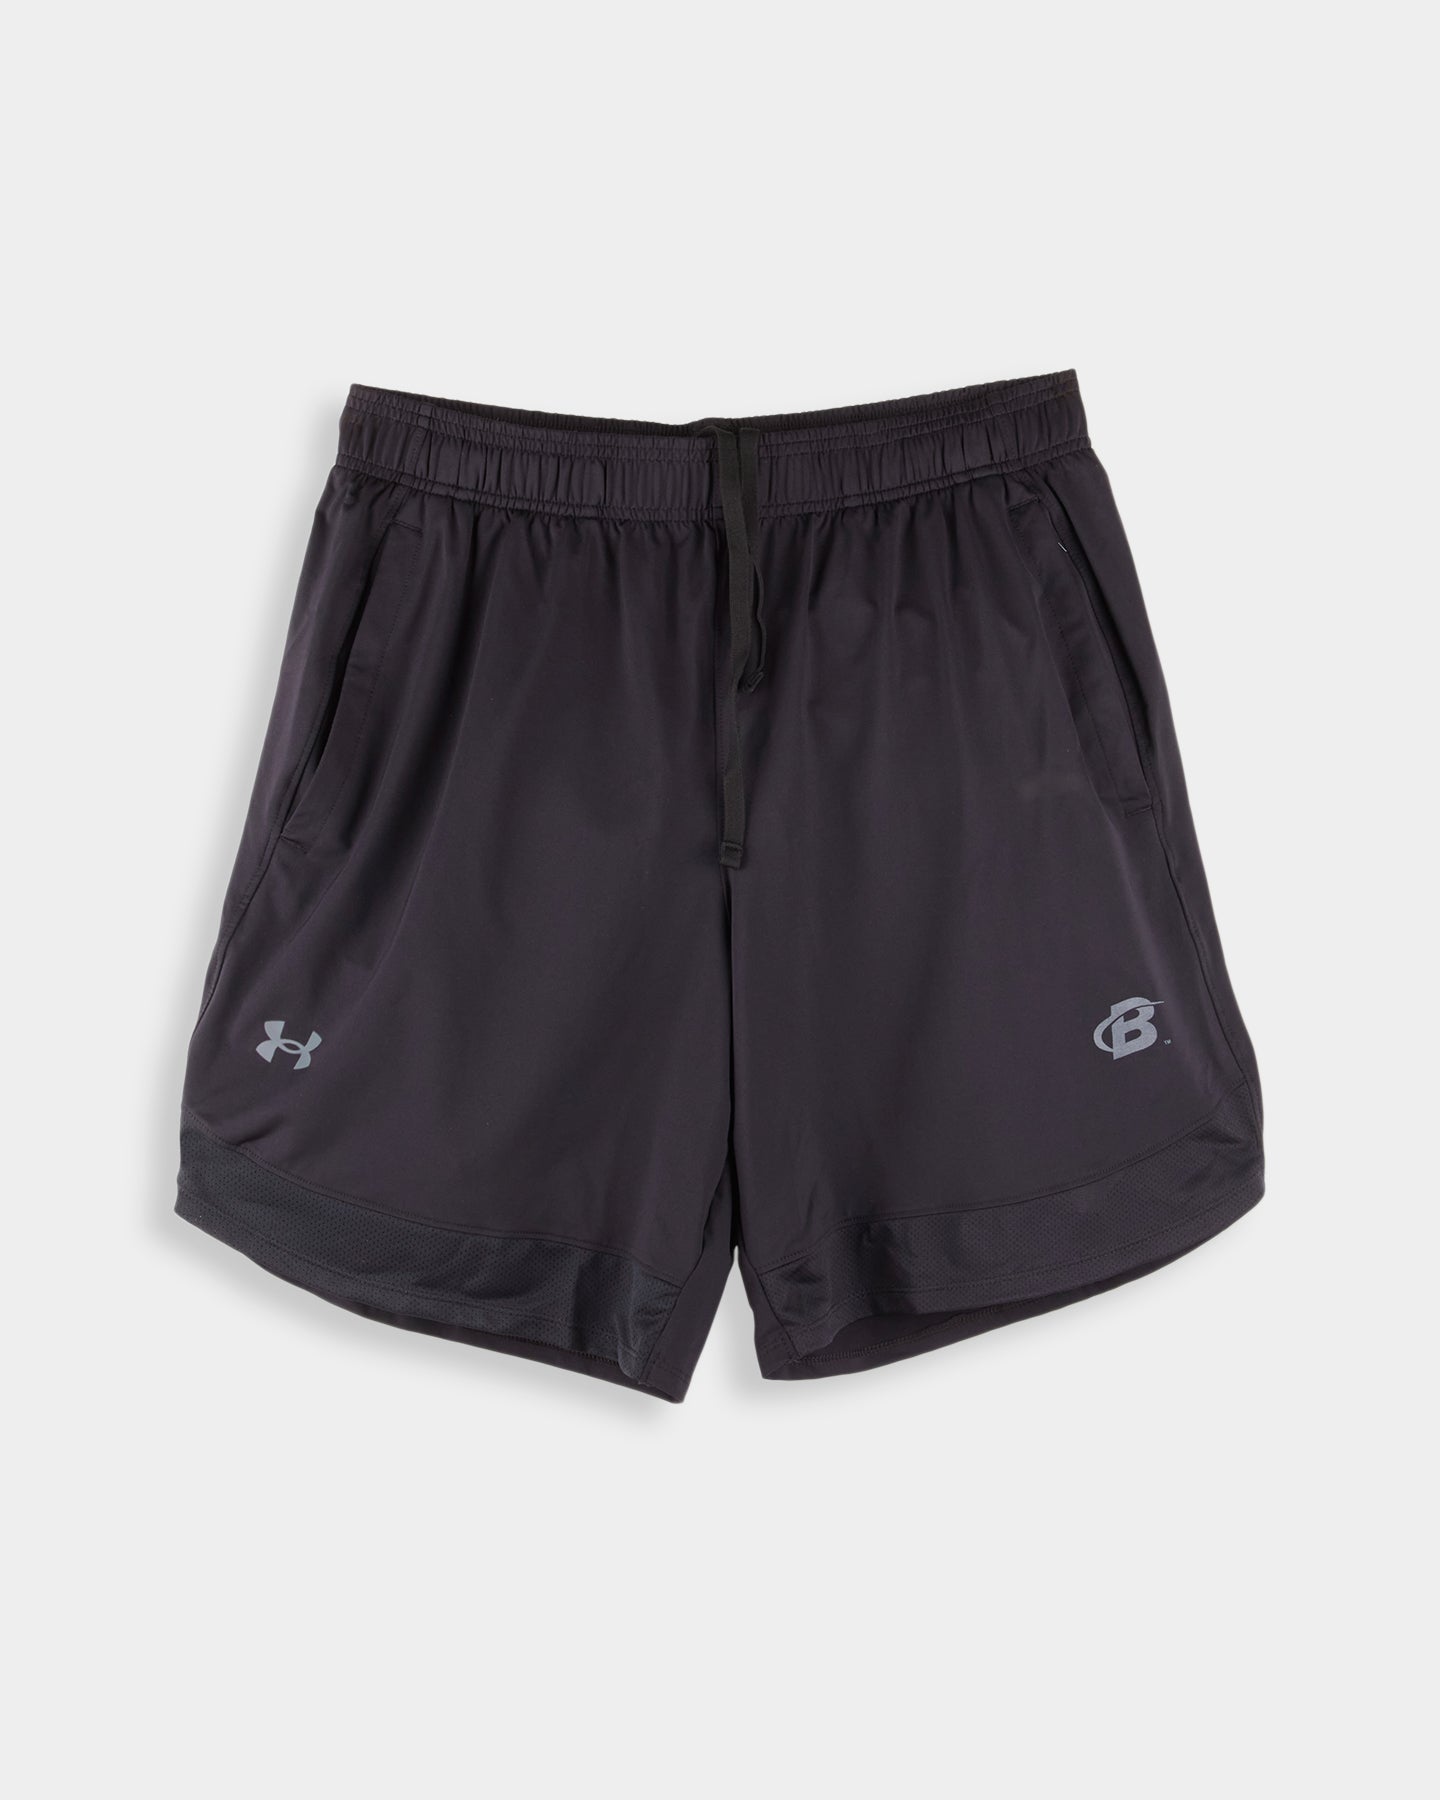 Under Armour Launch 7" 2in1 Short, Black, L A1